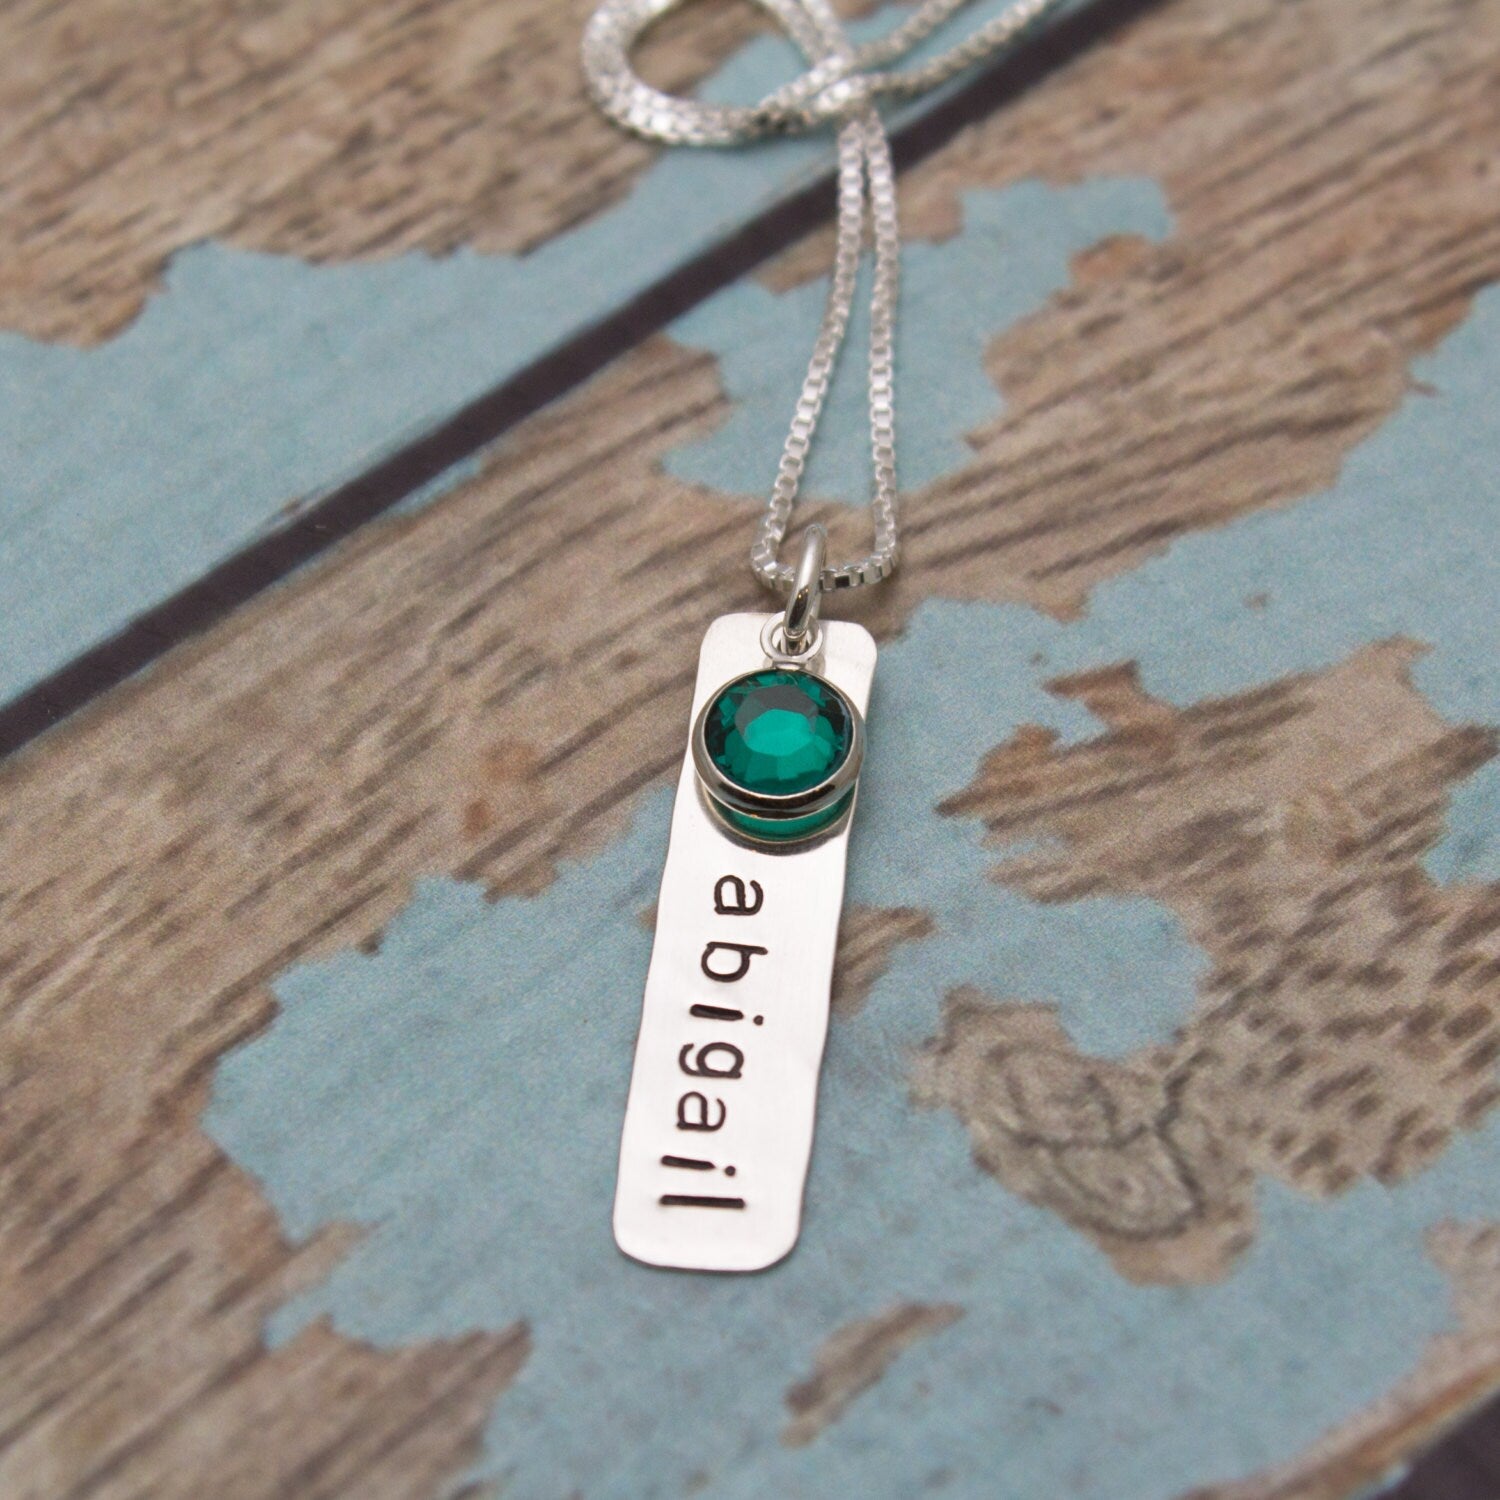 Personalized Sterlling Silver Tag Necklace with Birthstone Hand Stamped Jewelry